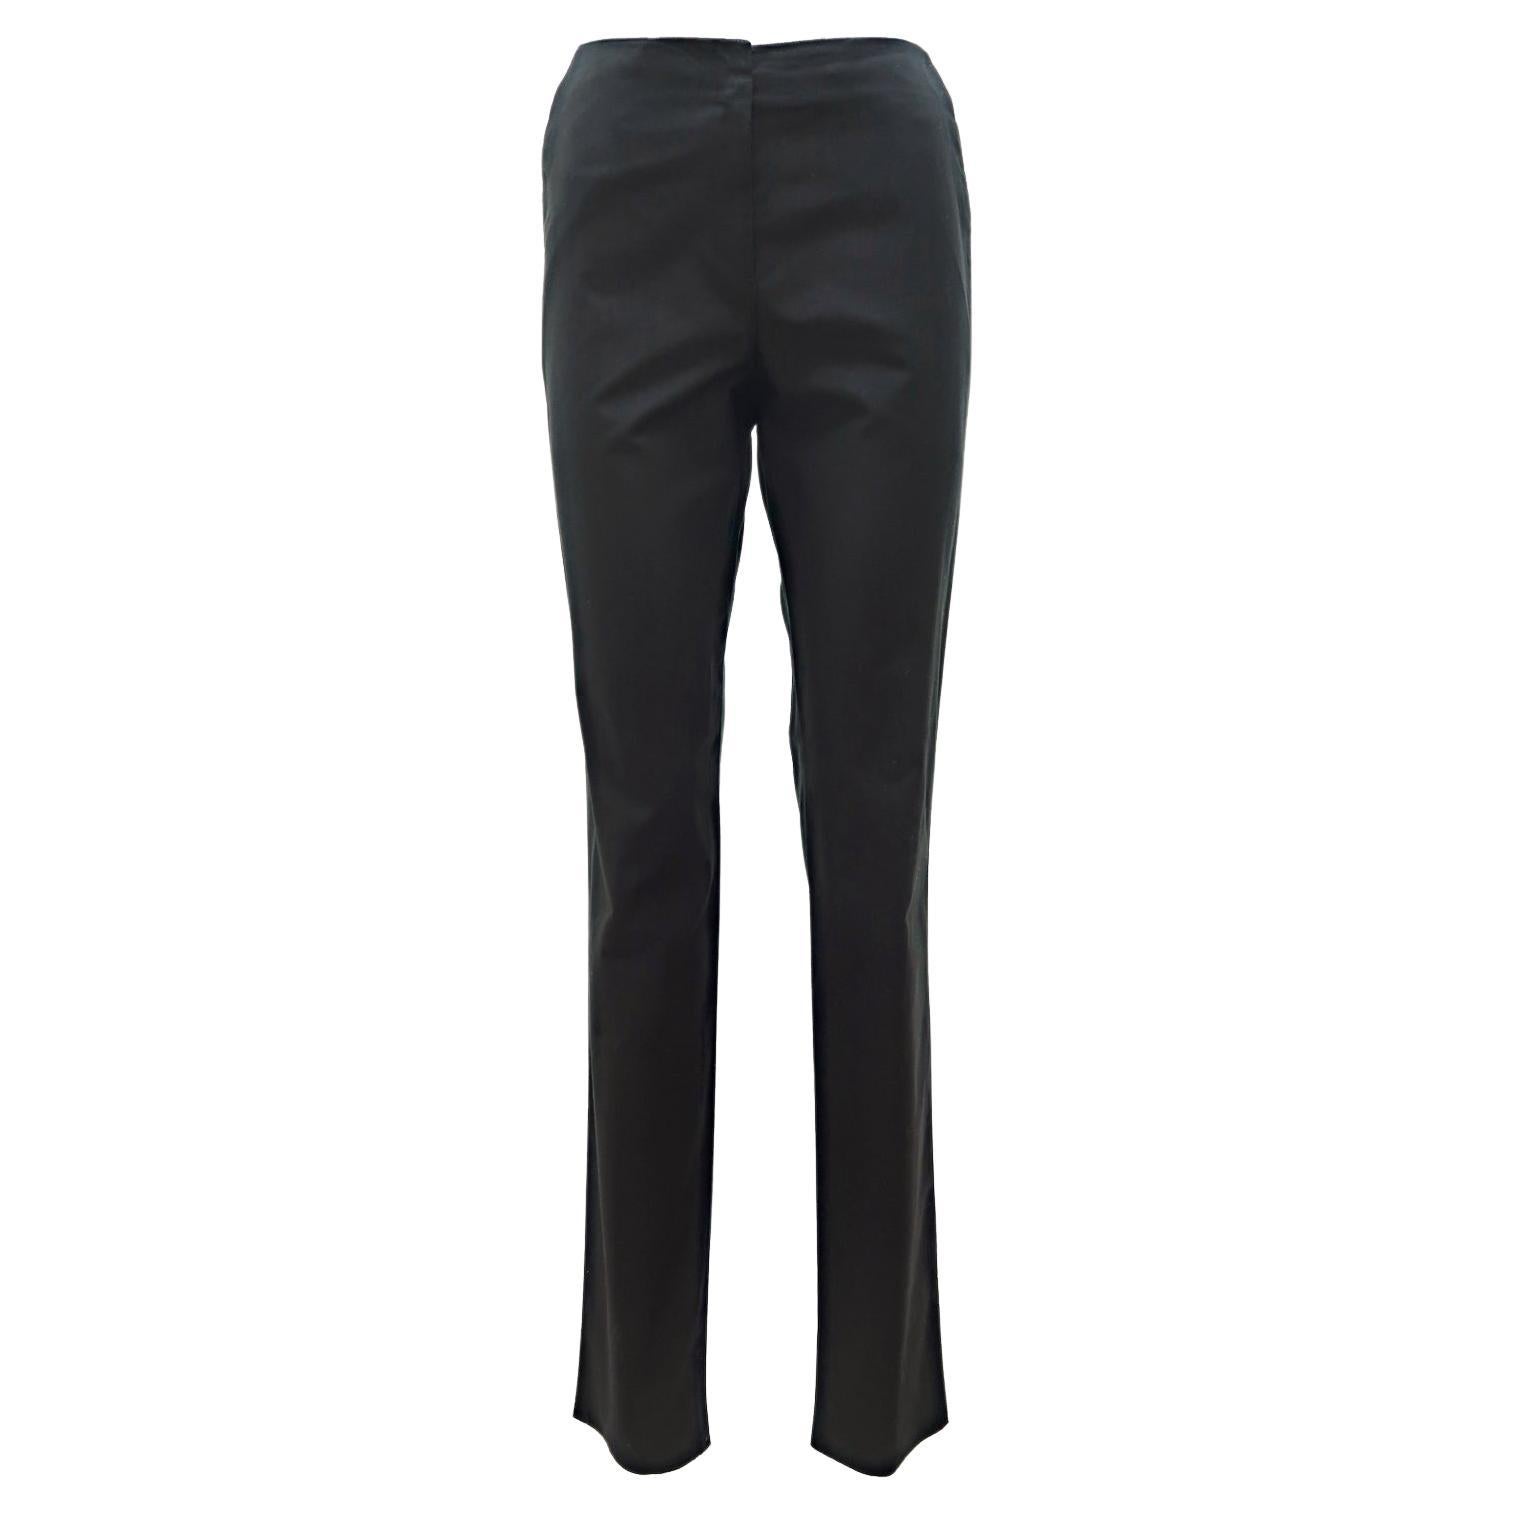 Yves Saint Laurent by Tom Ford FW-2001 Tailored Silhouette Cotton Pants